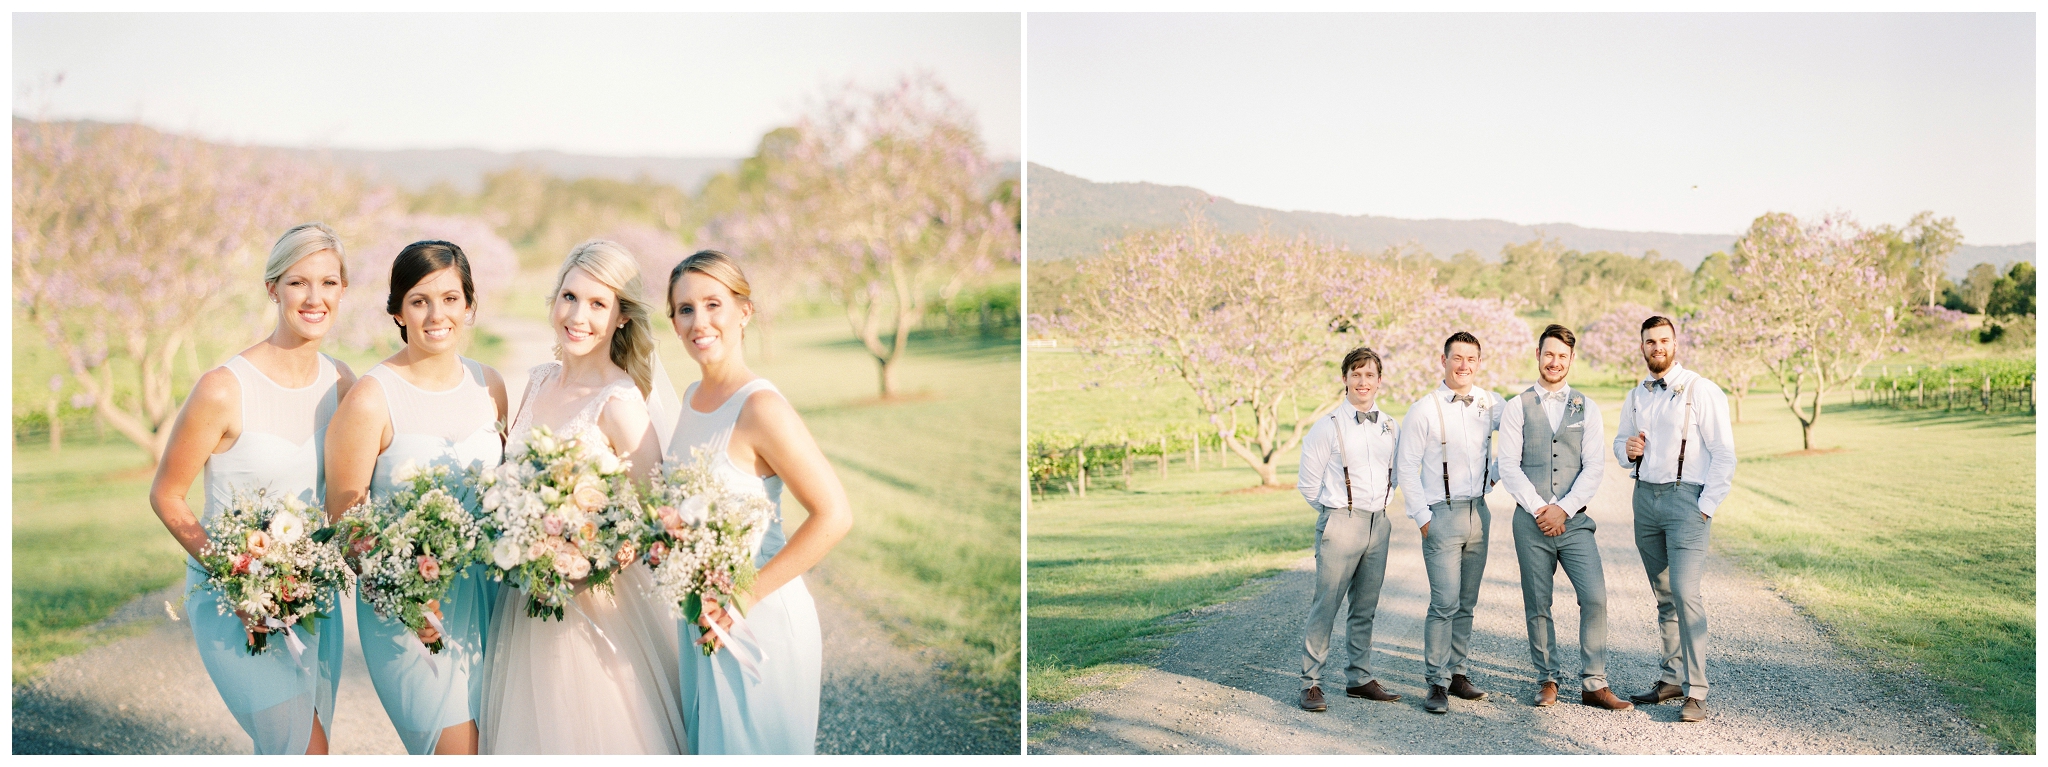 Tegan and Alex Wedding at Albert River Wines by Casey Jane Photography 50